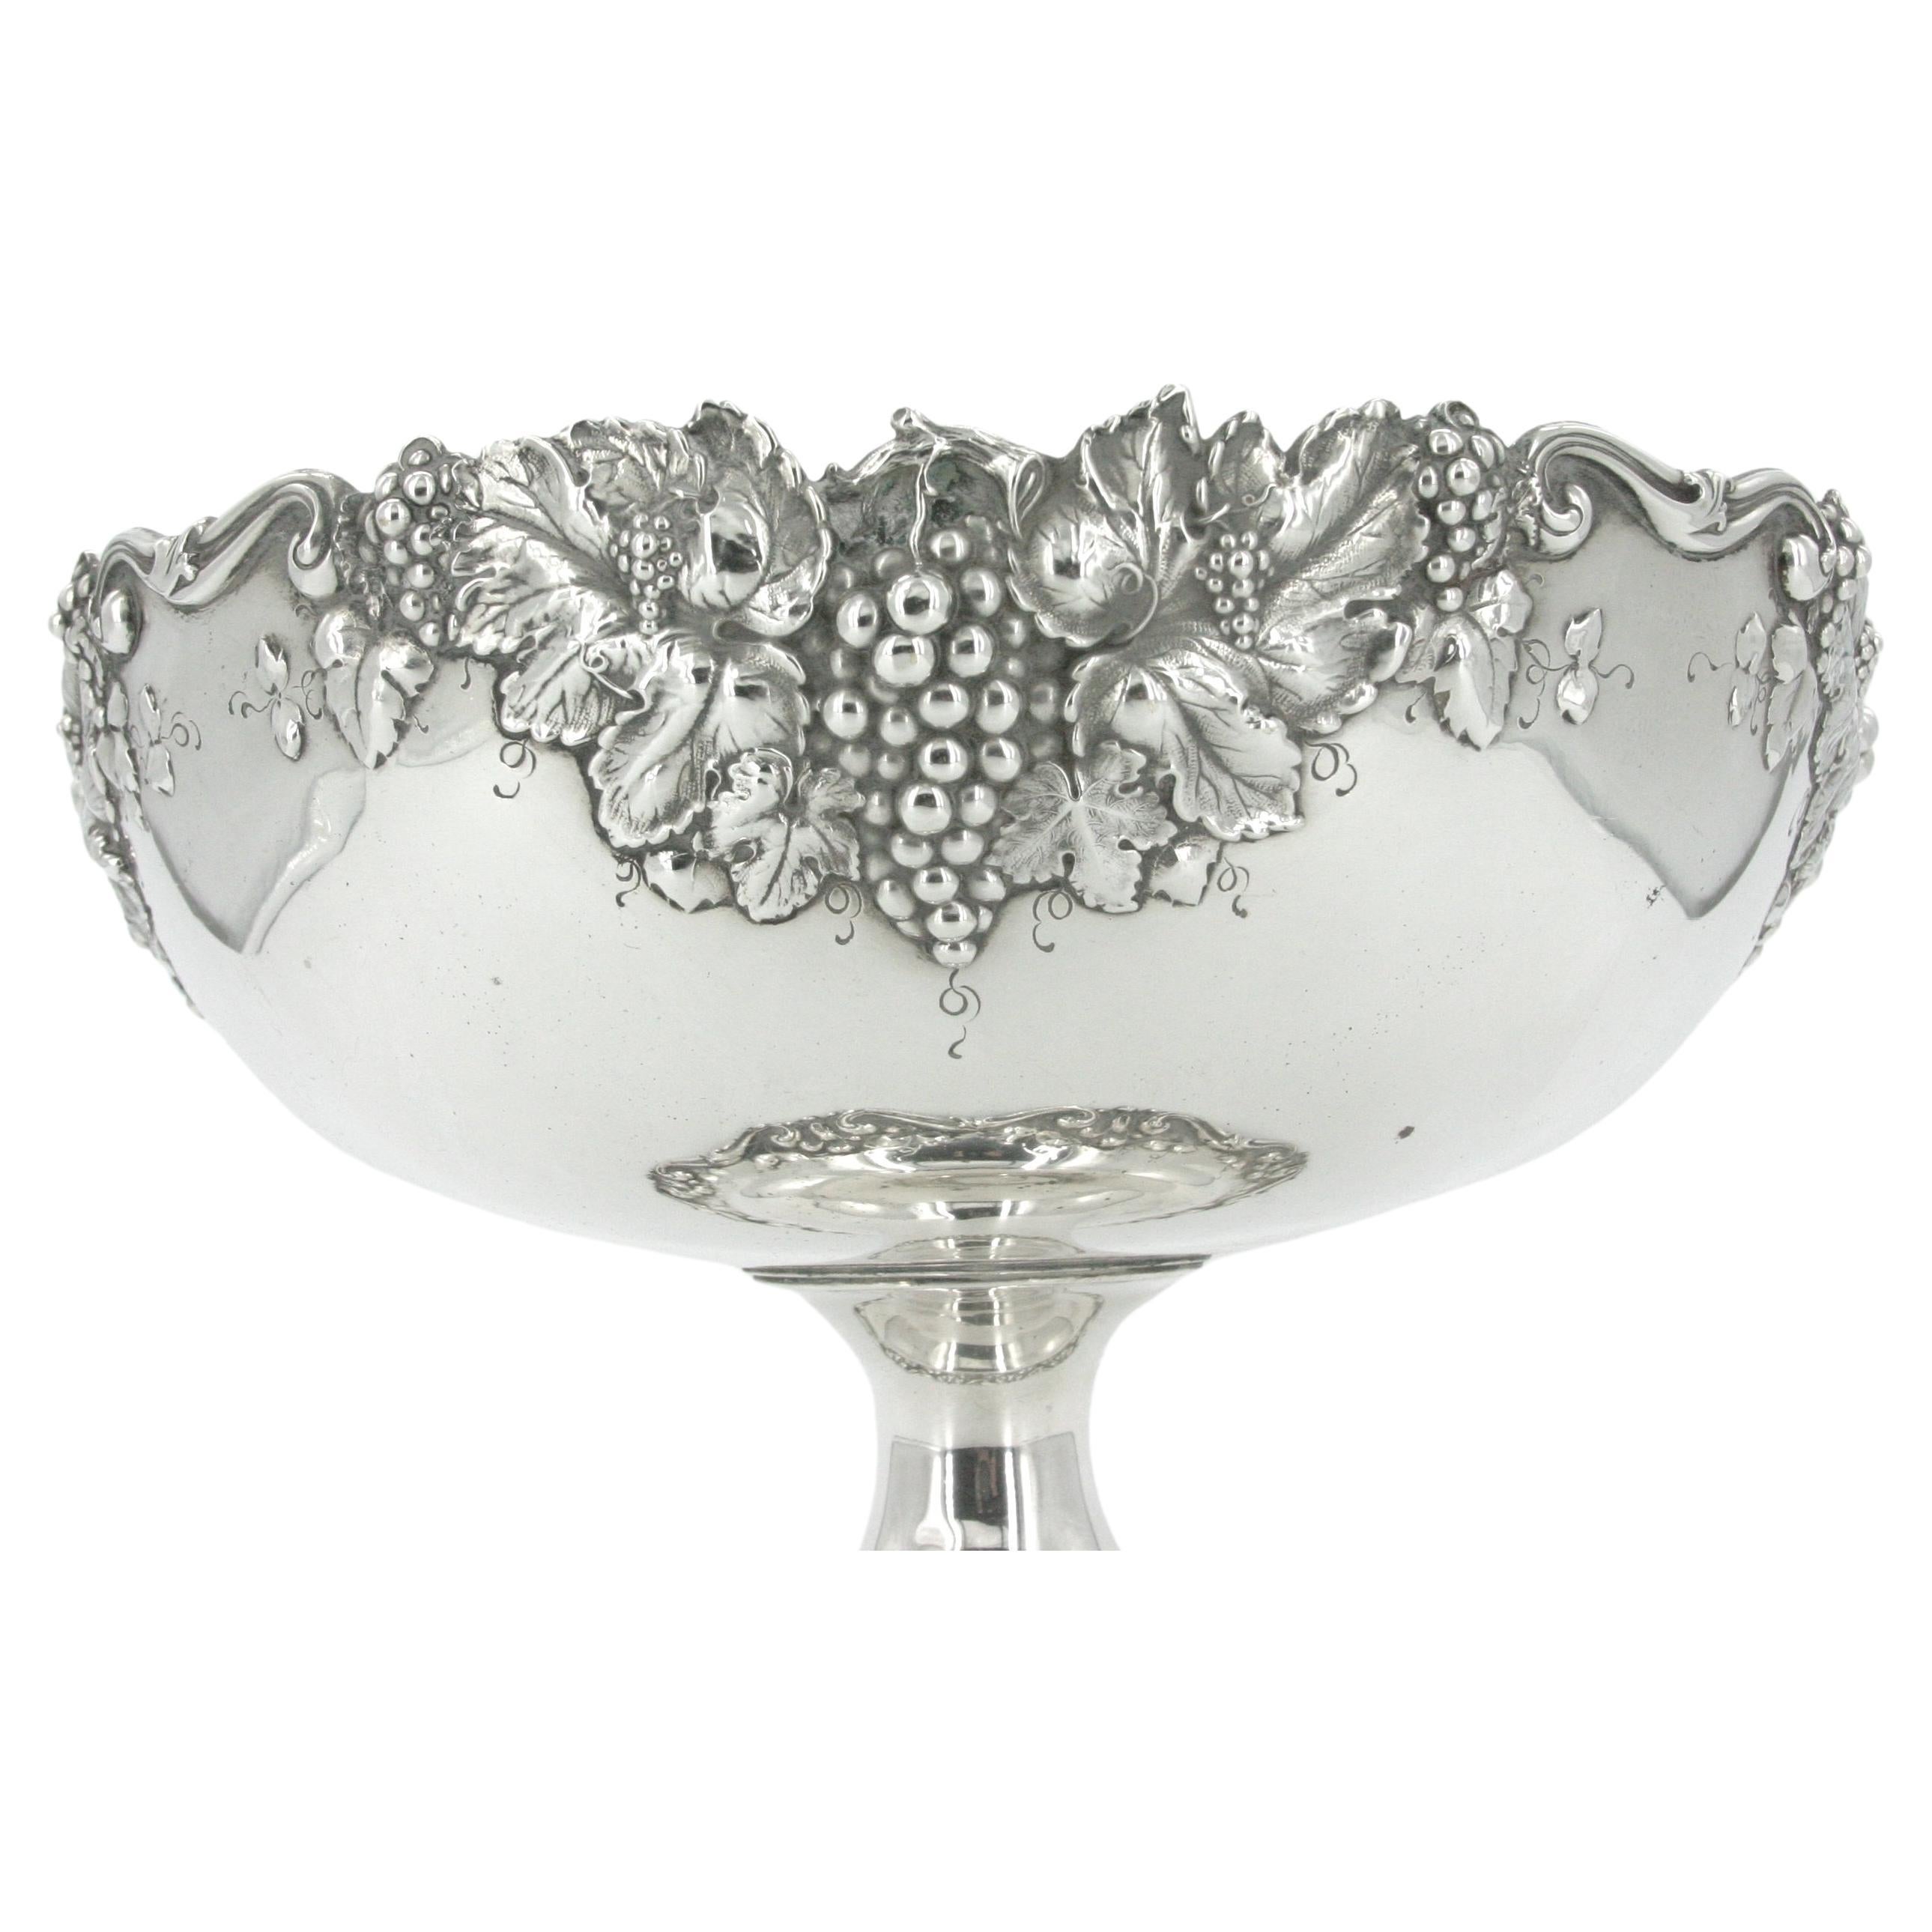 Hand-Crafted Large Sterling Silver Decorative Footed Bowl